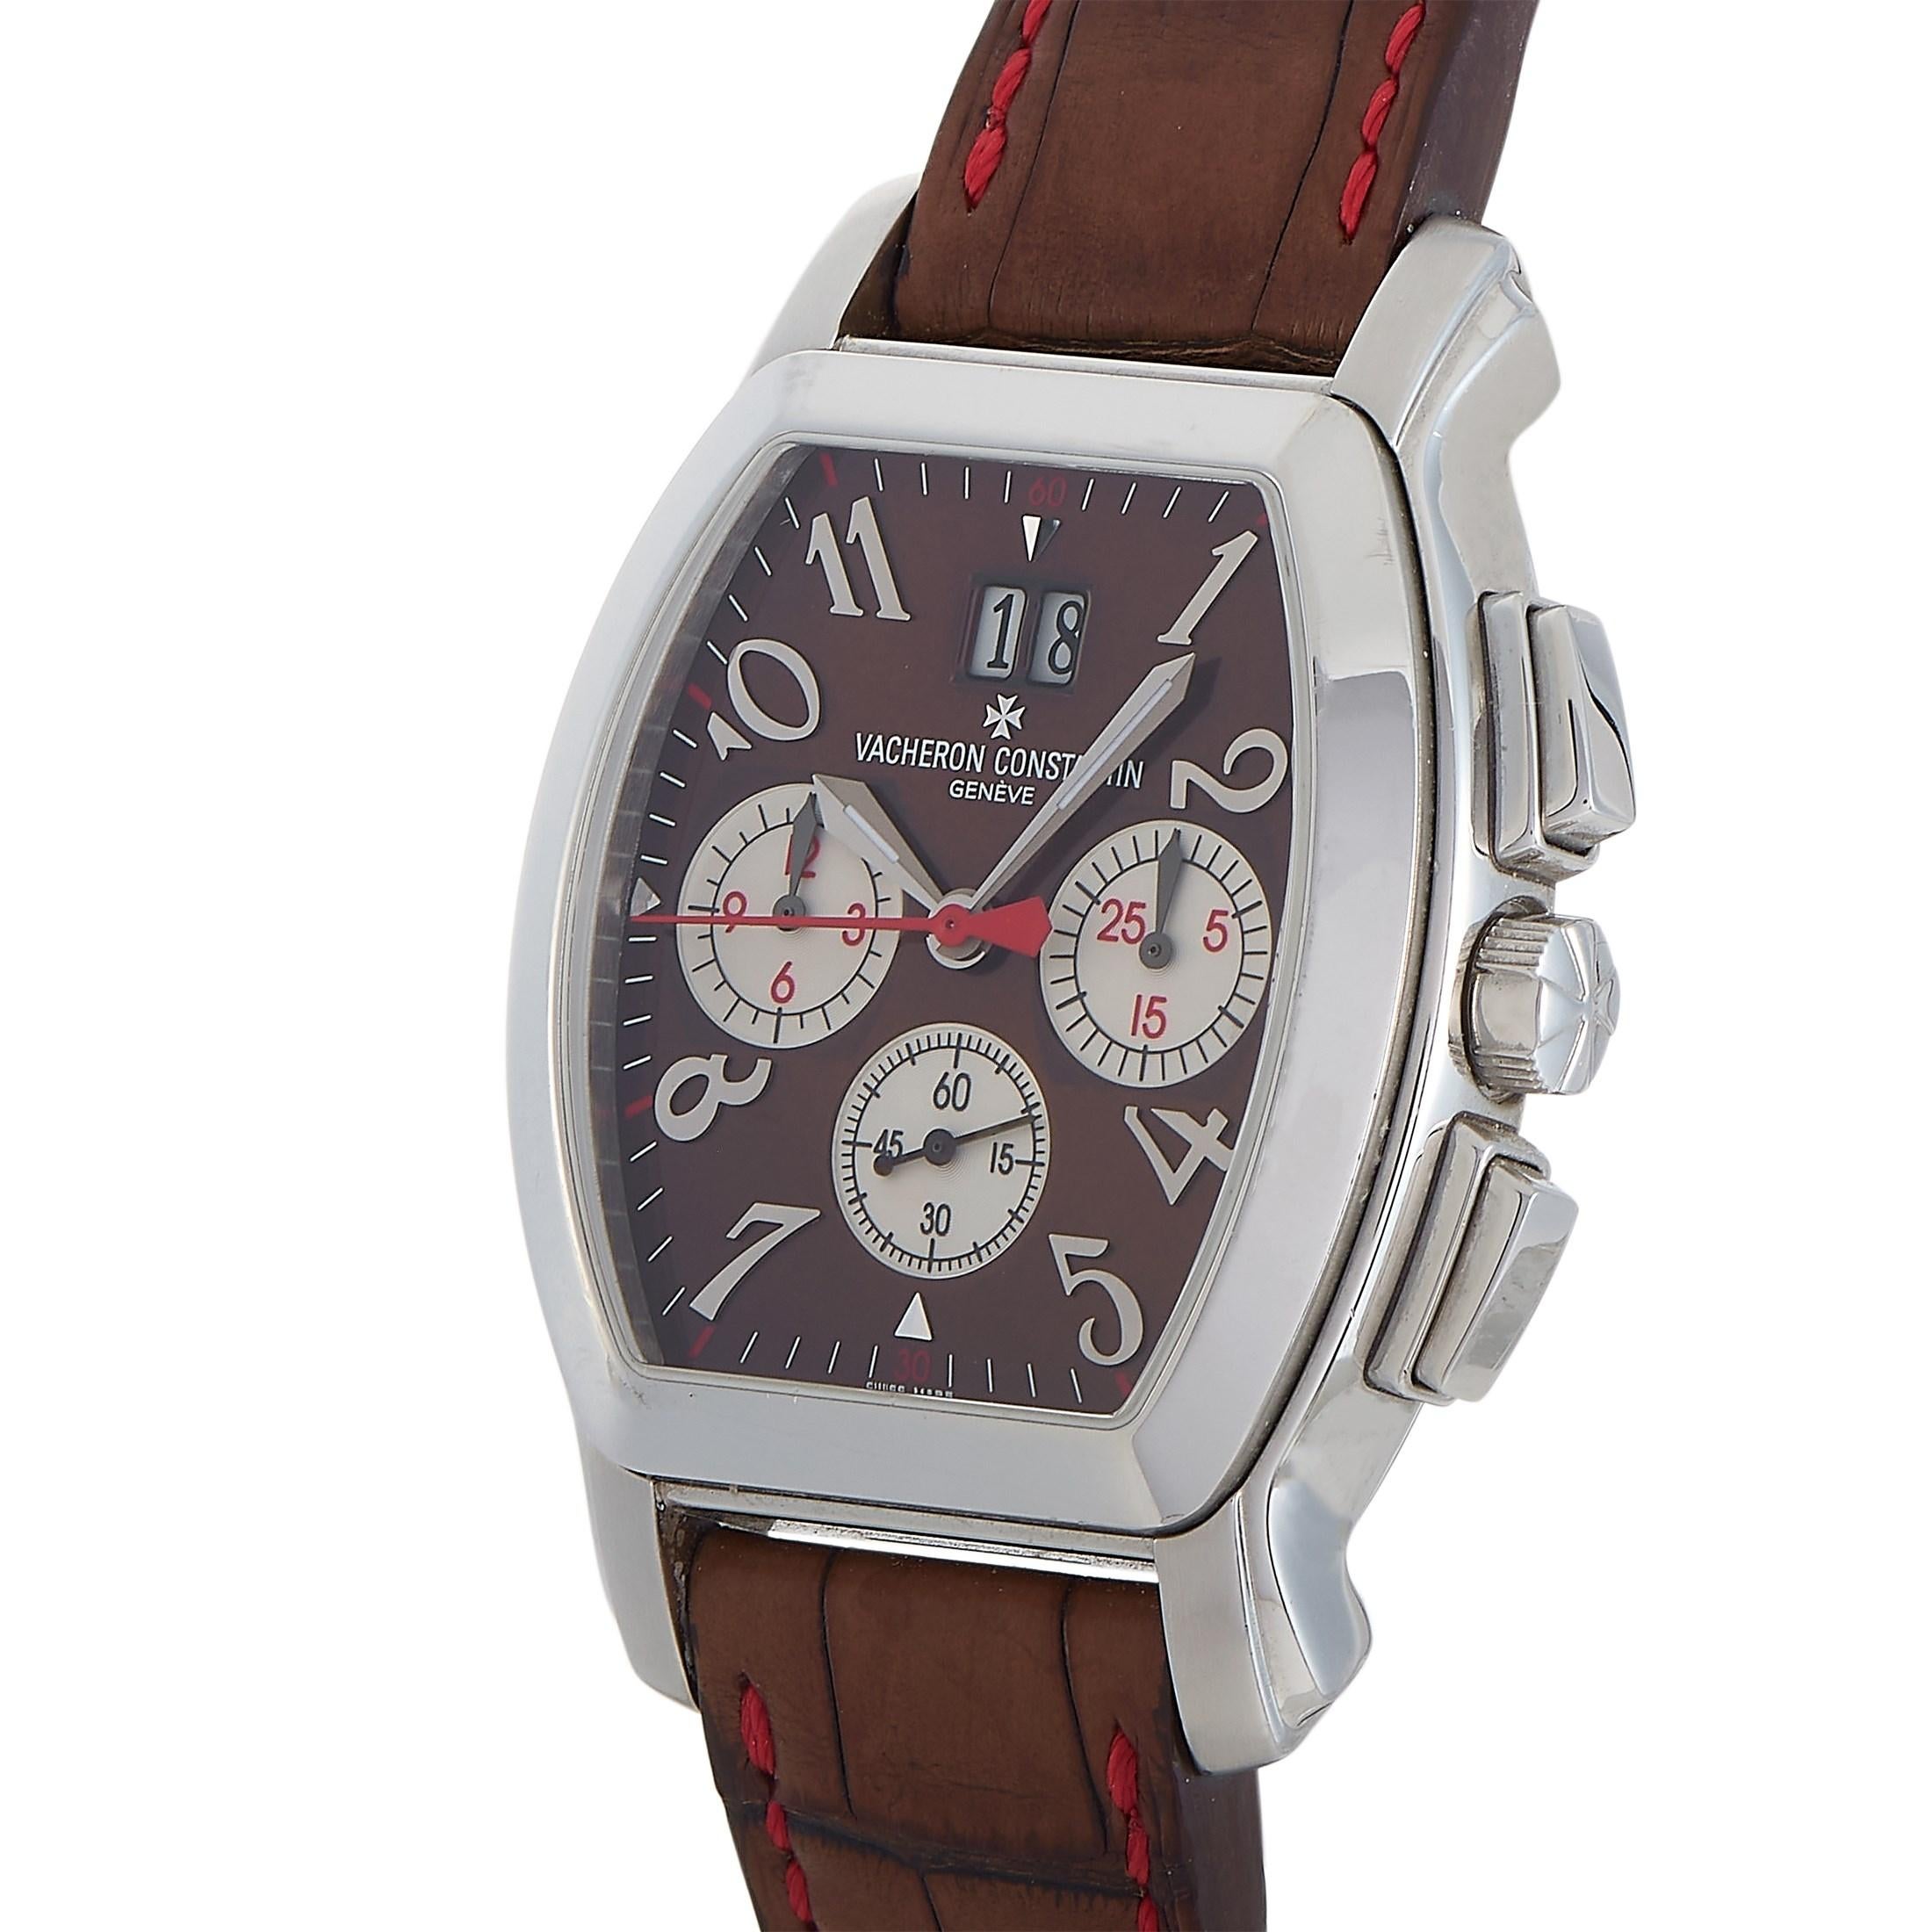 This Vacheron Constantin Royal Eagle Malte Stainless Steel 39.5mm Special Edition Watch, reference number 49145/000A 9308, includes a stainless steel case measuring 39.5 mm in diameter. It is presented on a brown alligator leather band with